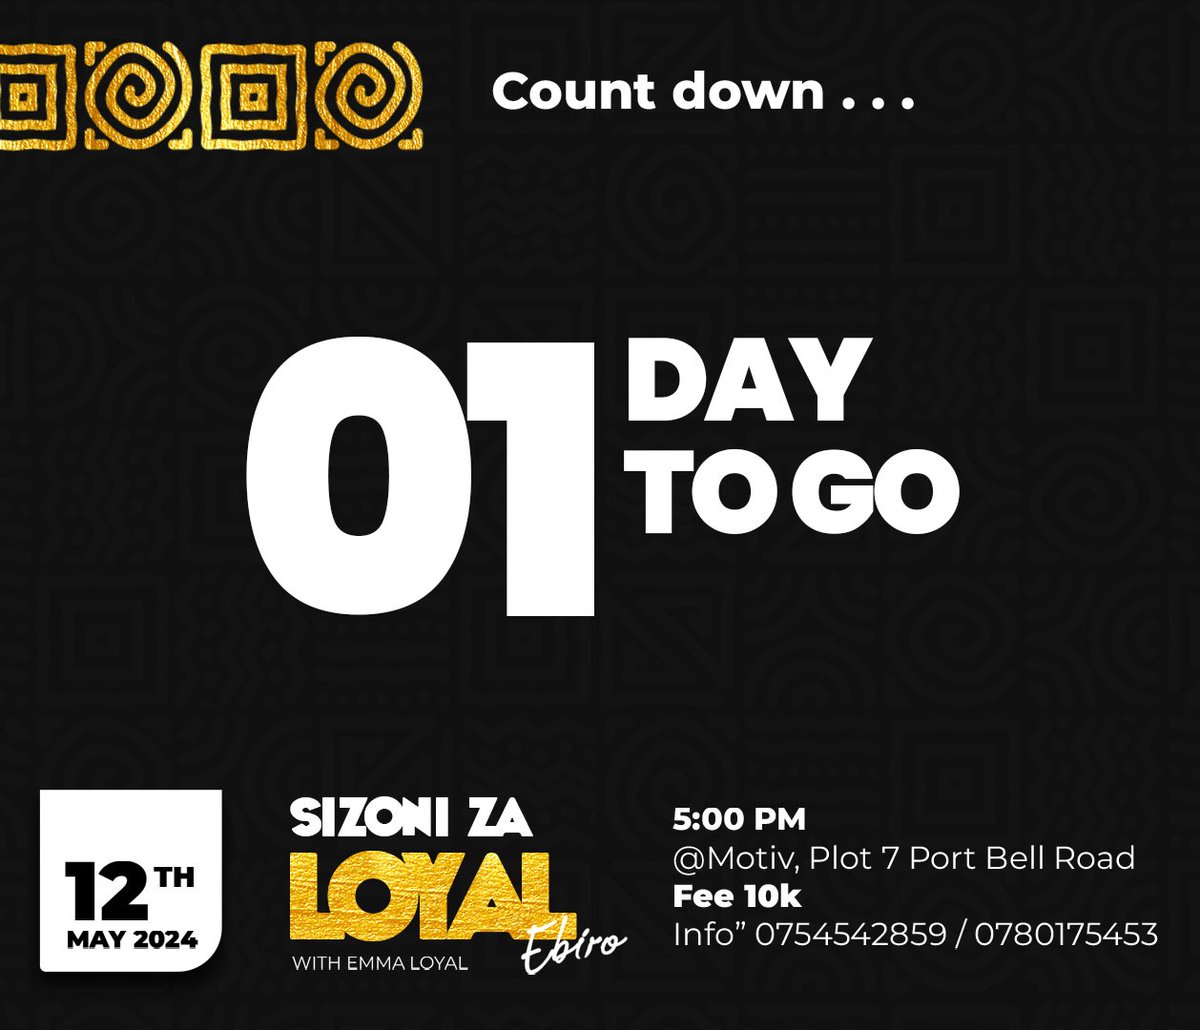 Children of God, we have only 01 day left to our BIG DAY... Have you bought your tickets? Tickets go for only 10k.